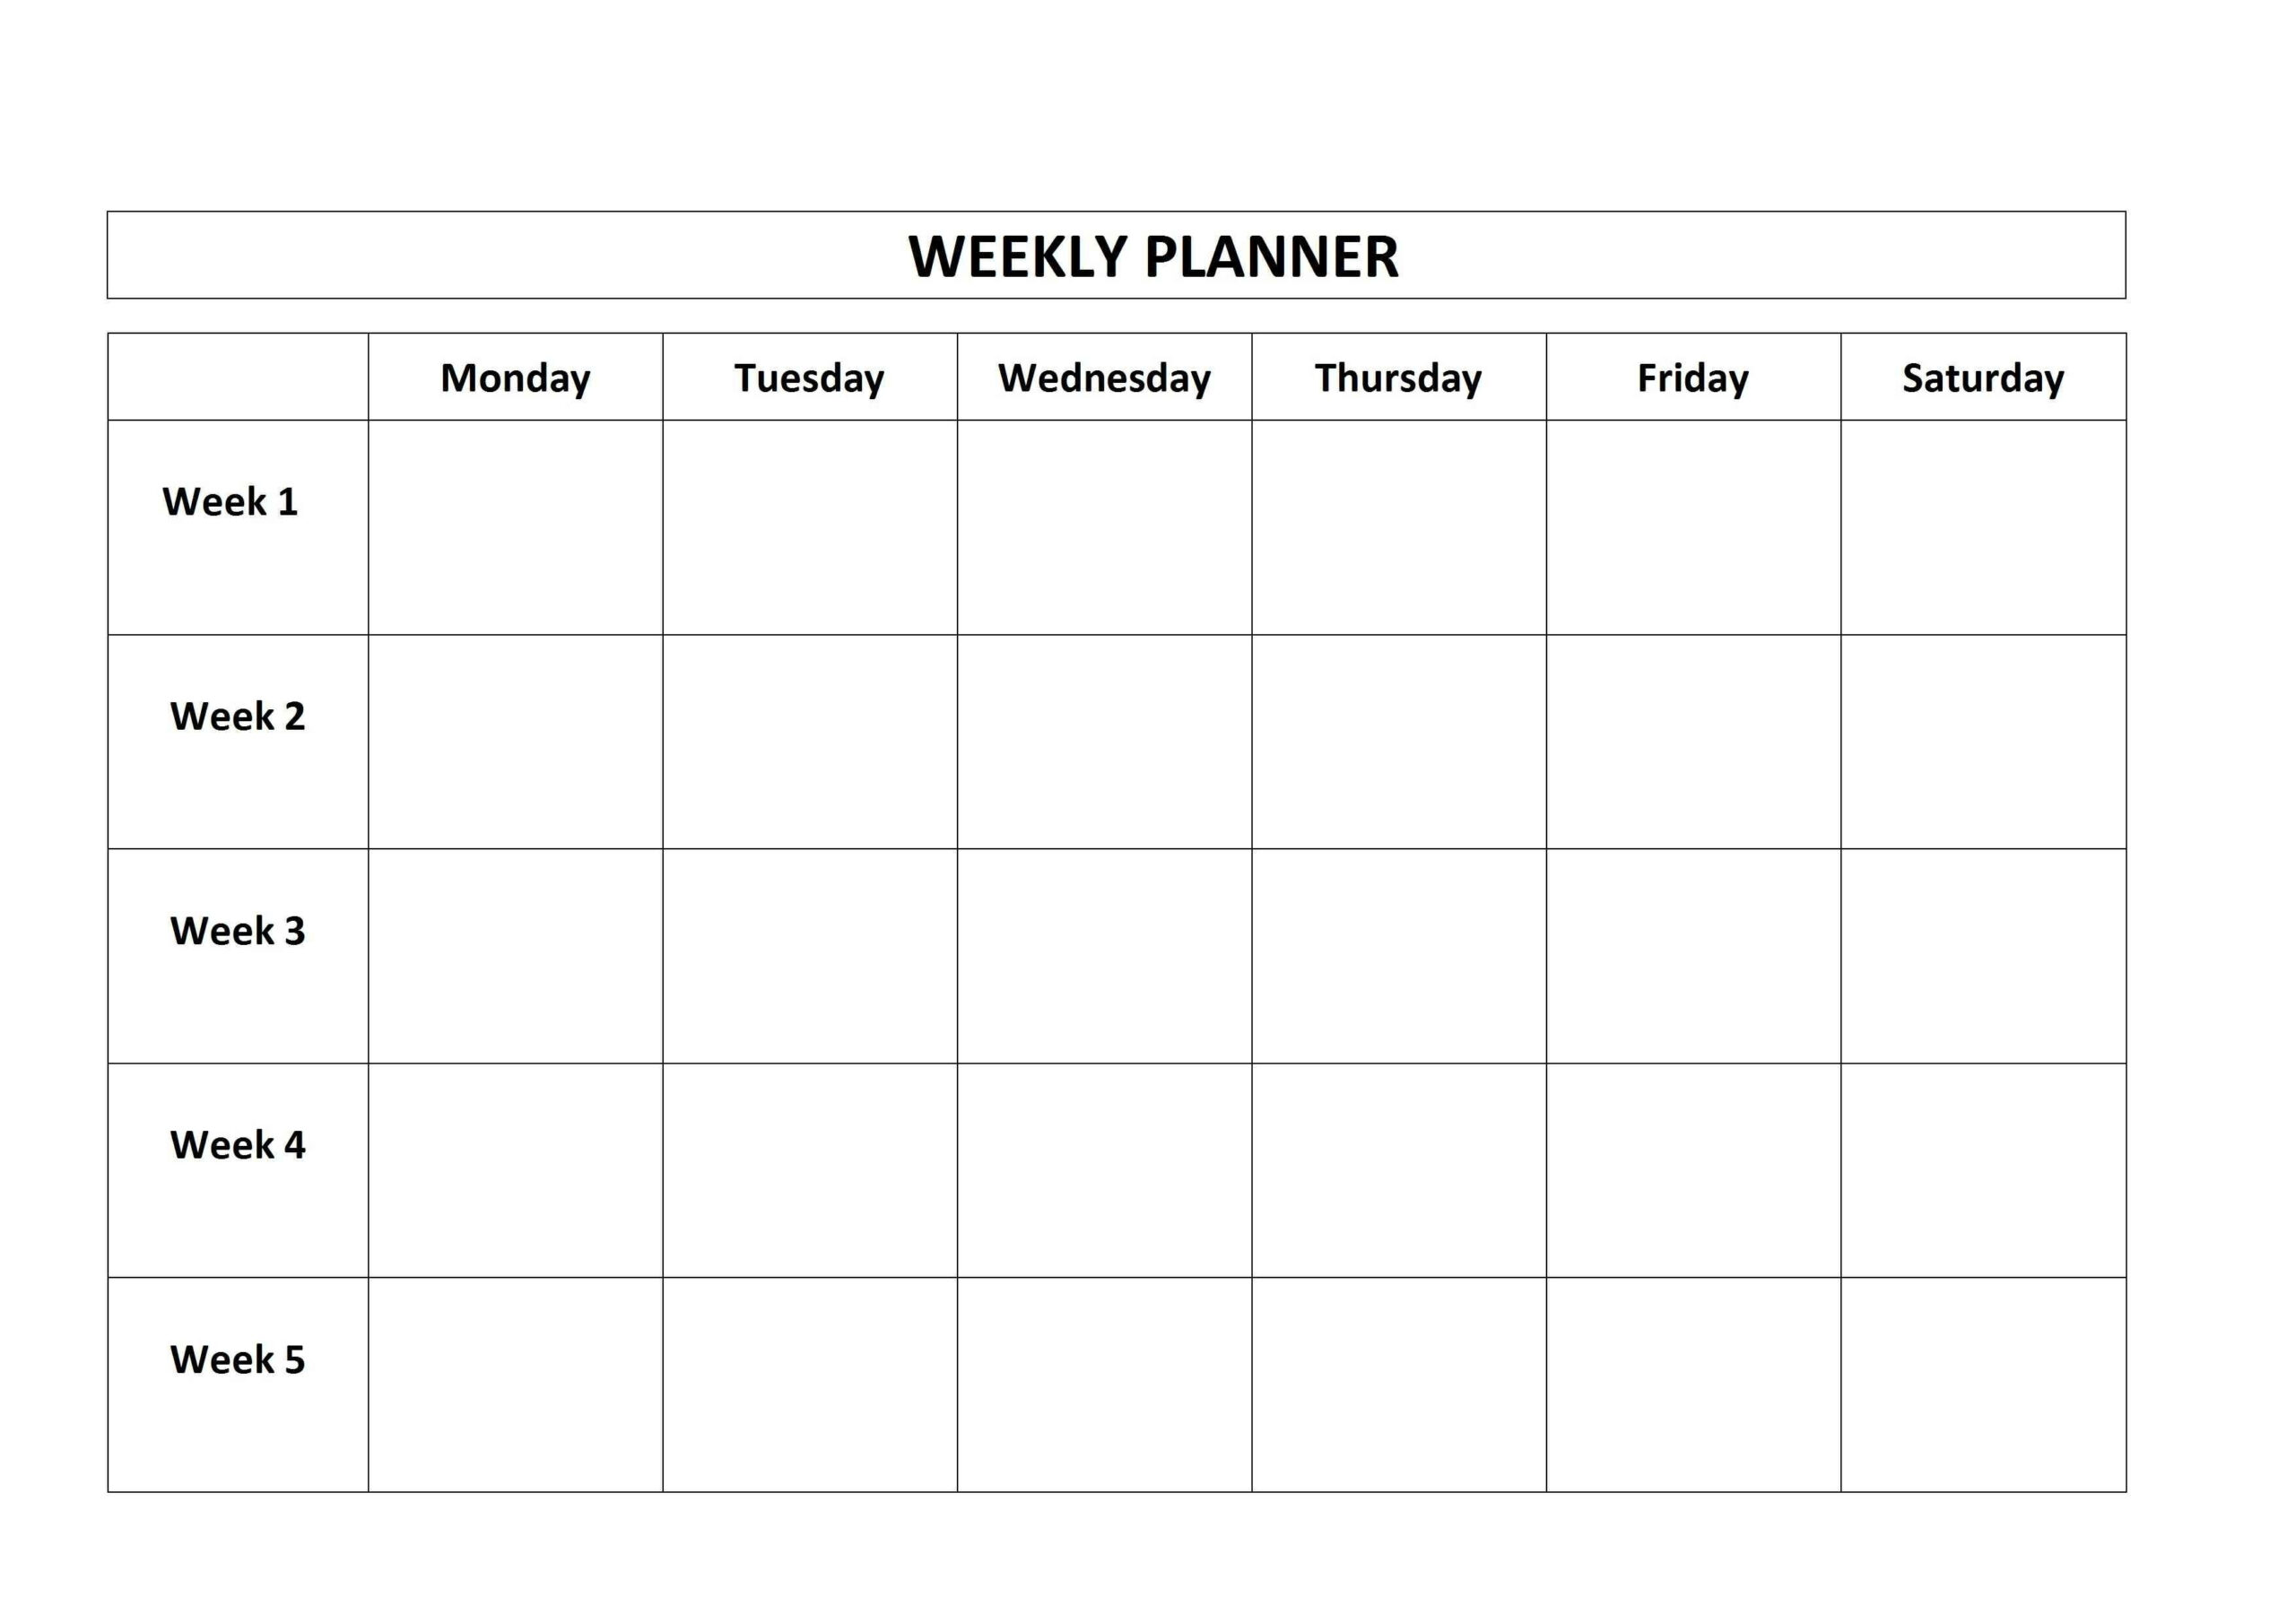 Monday Through Friday Schedule Template | Example Calendar Printable with Monday To Friday Schedule